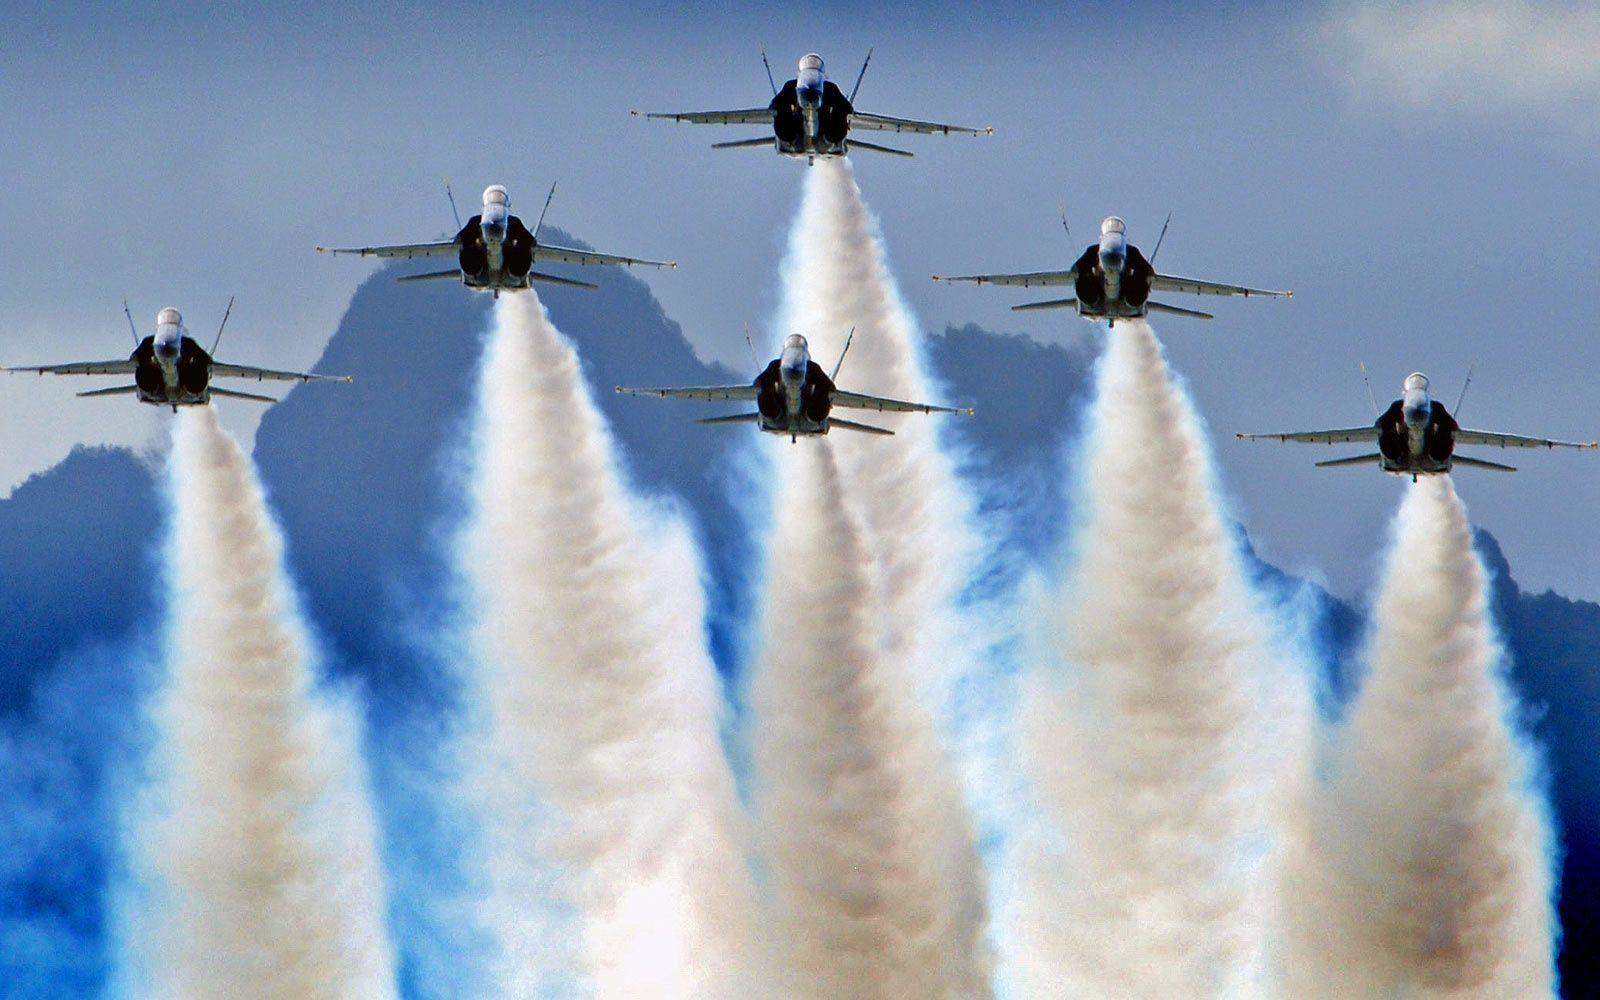 Cool HD Blue Angels Demostration Wallpaper. Download wallpaper page